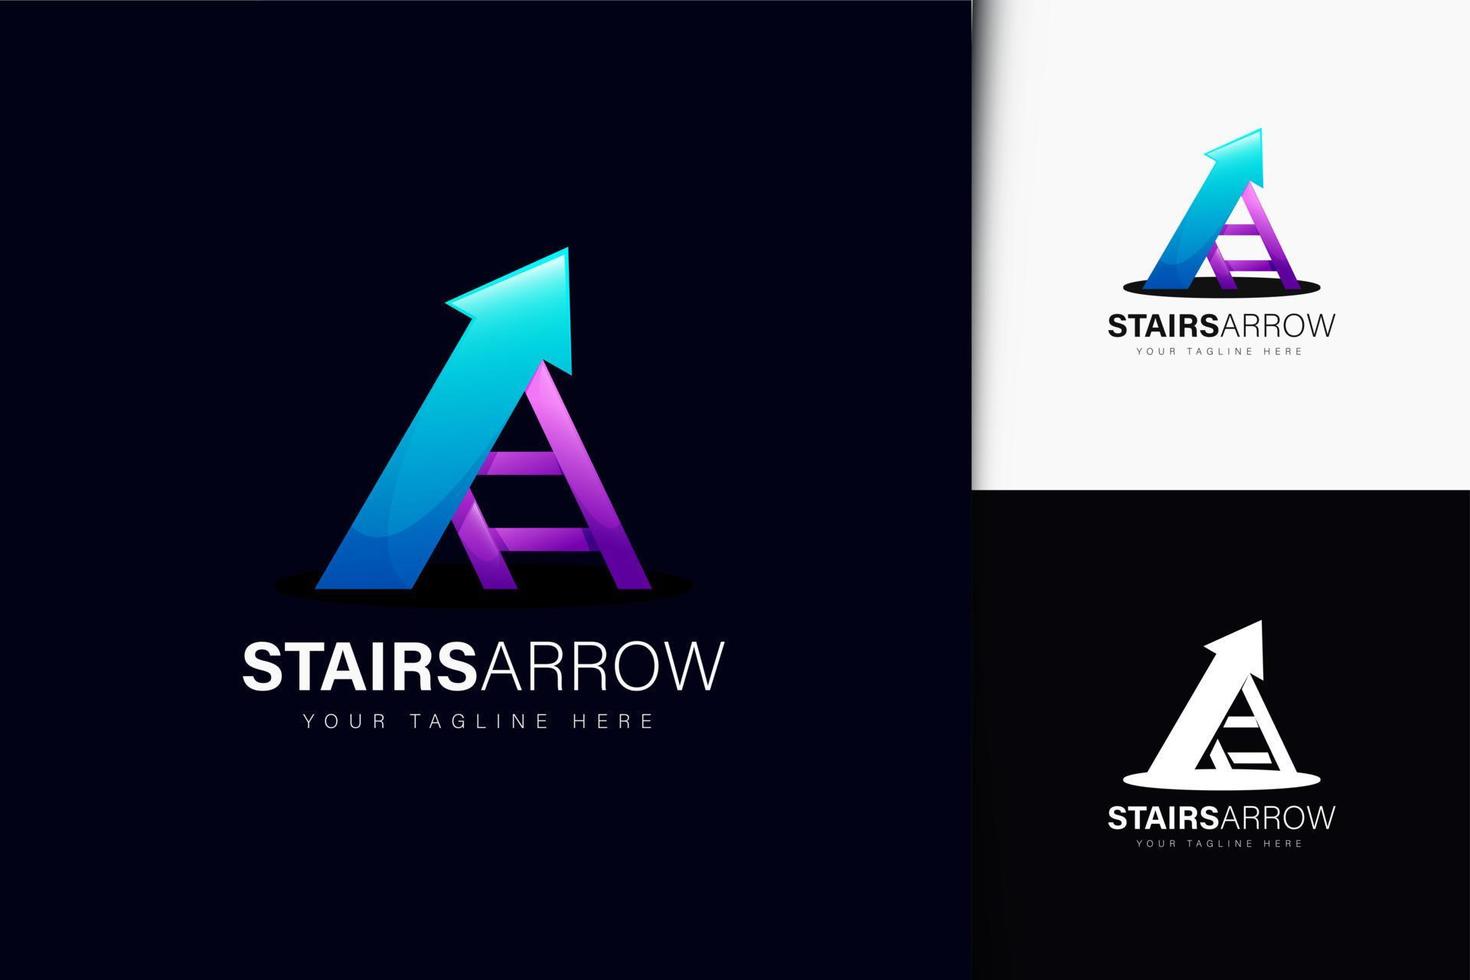 Stairs arrow logo design with gradient vector